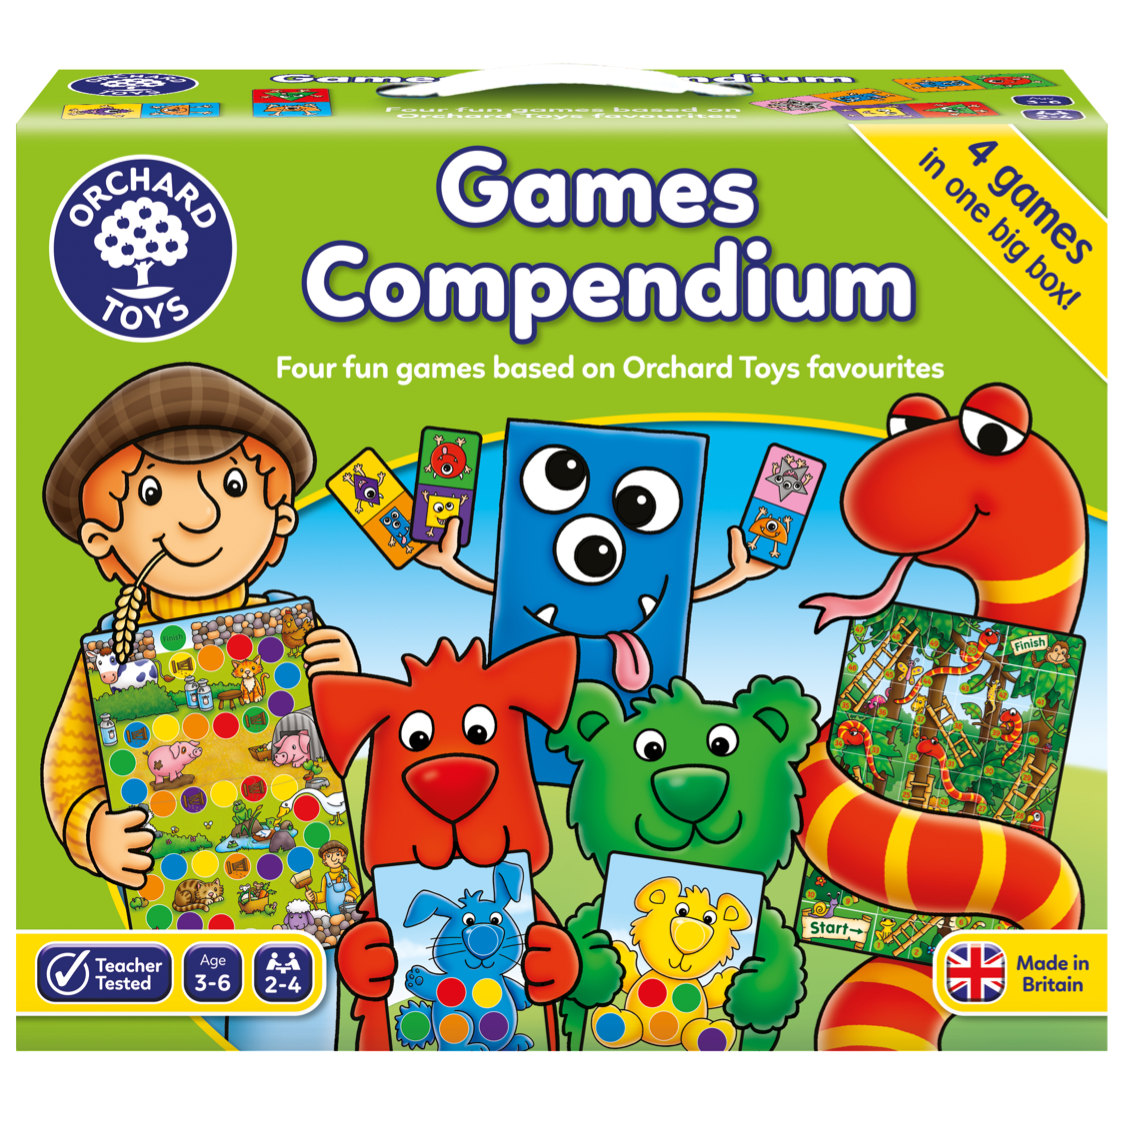 Best 4 fun. Orchard Toys. Orchard Toys почта. Fun and games. Counting Caterpillars by Orchard Toys.